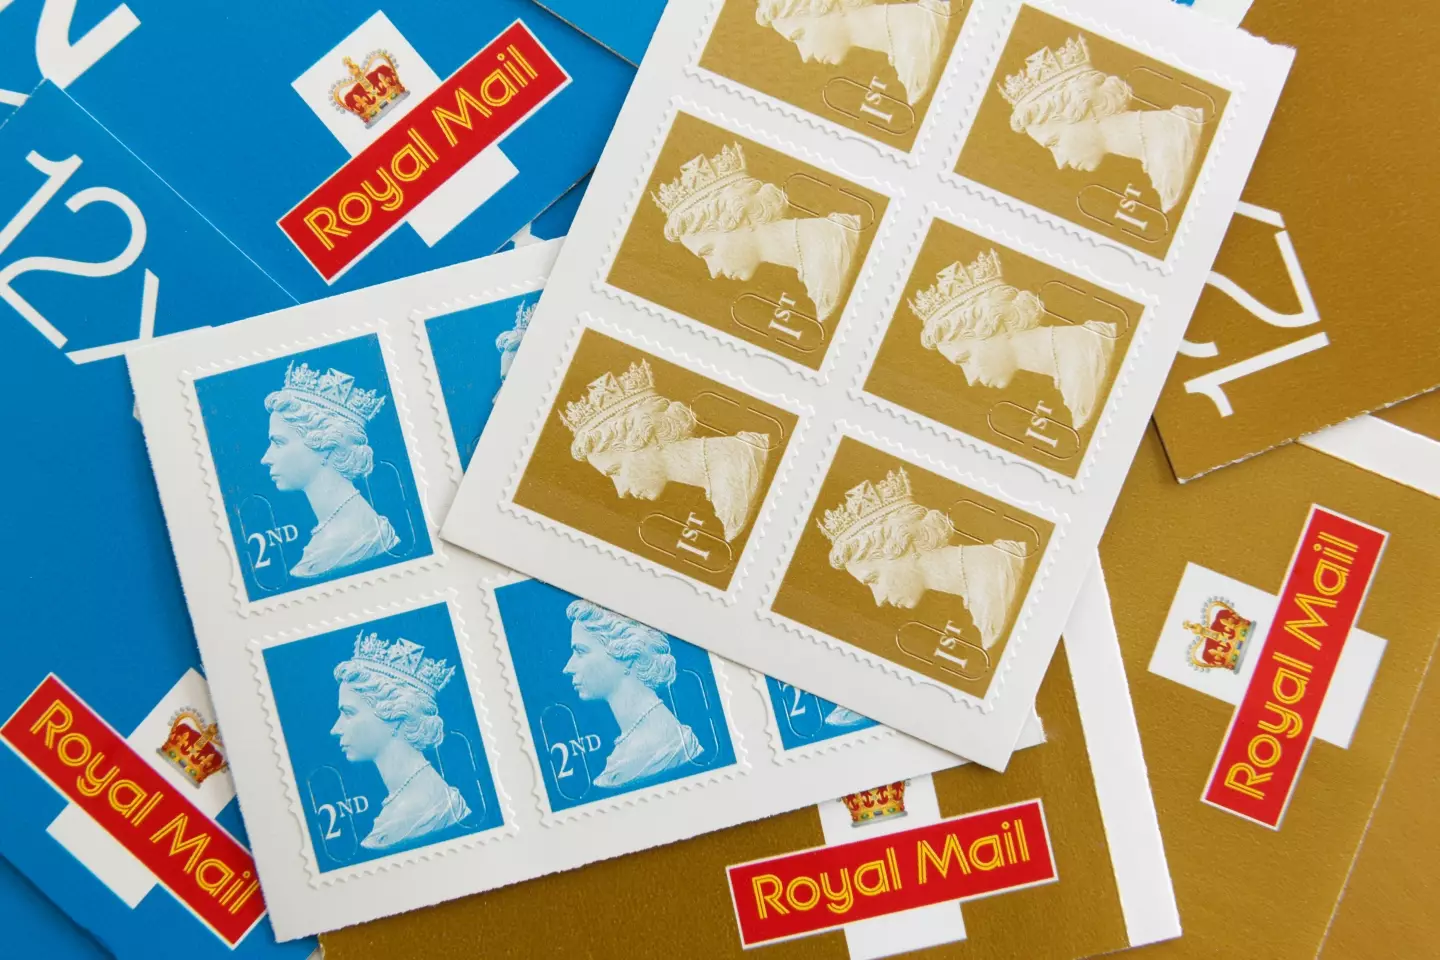 With stamps set to increase in price from 4th April, Martin advised stocking up (